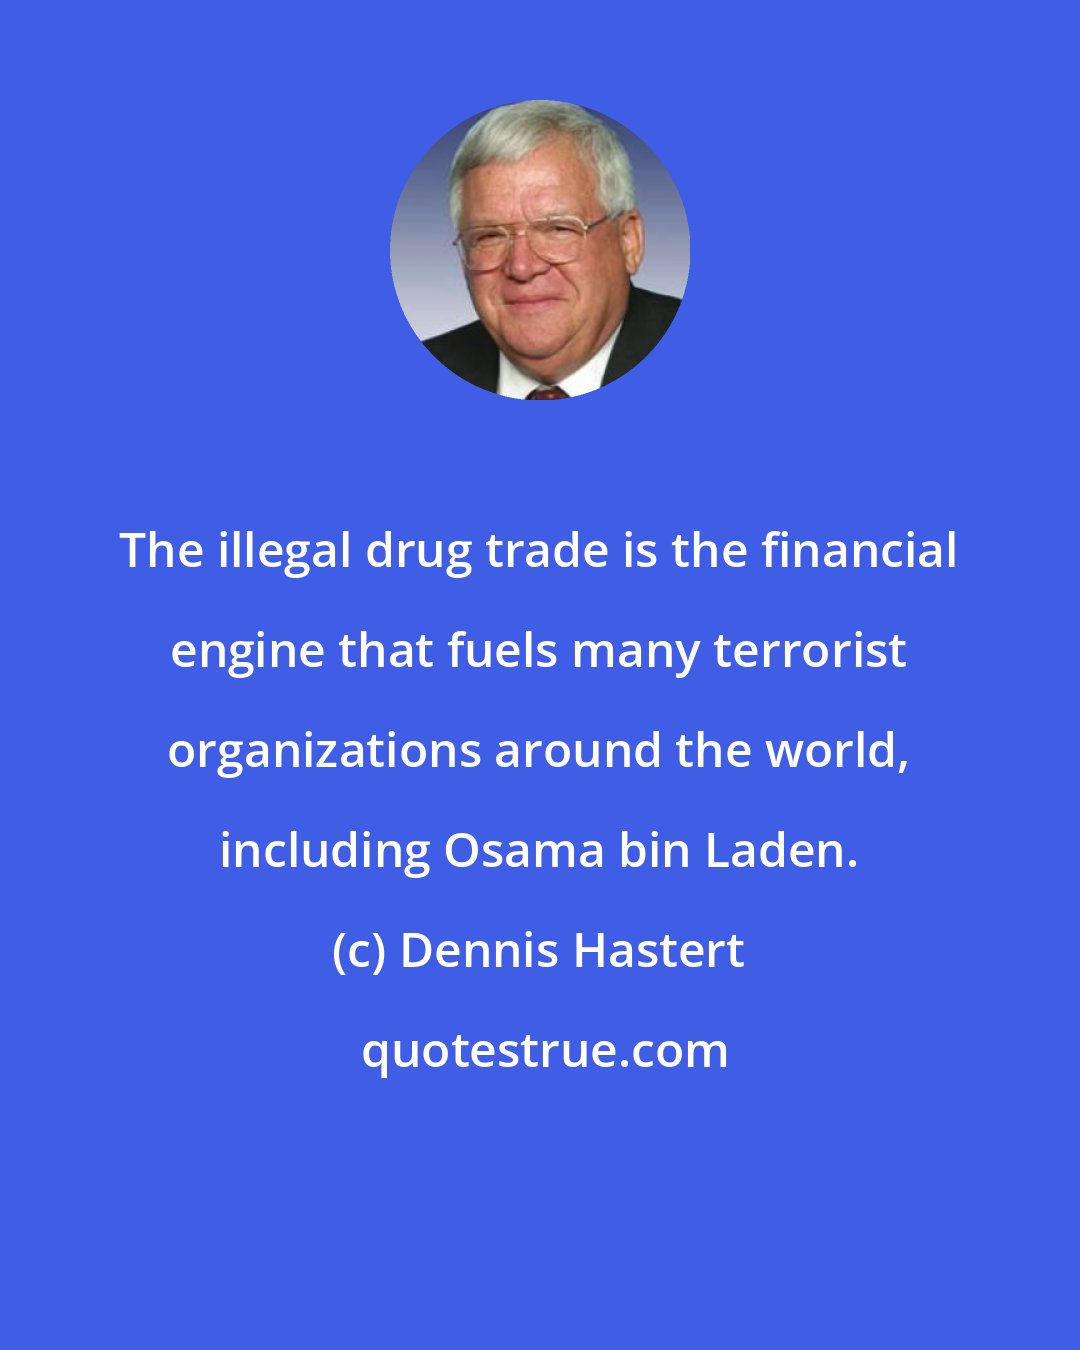 Dennis Hastert: The illegal drug trade is the financial engine that fuels many terrorist organizations around the world, including Osama bin Laden.